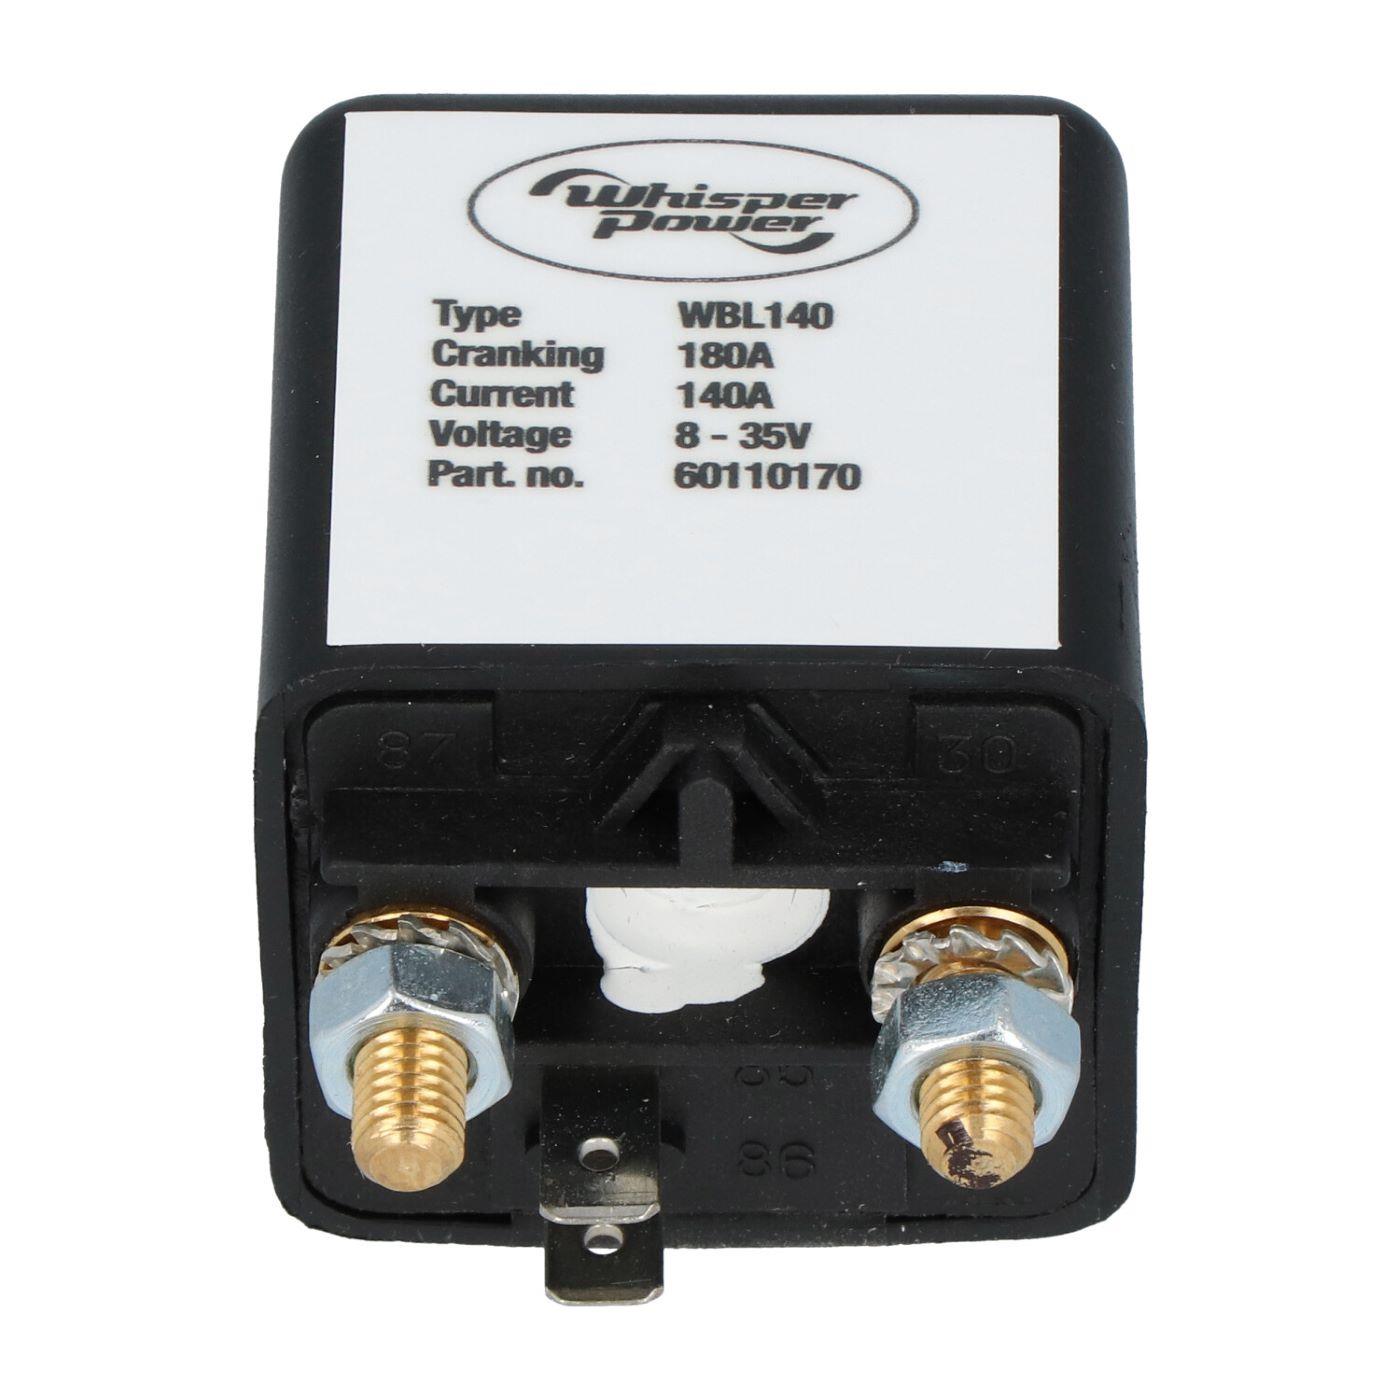 WhisperPower WBL-140 BATTERY LINK 8-35V DC / 140A – With Motion detection – EURO6 compatible